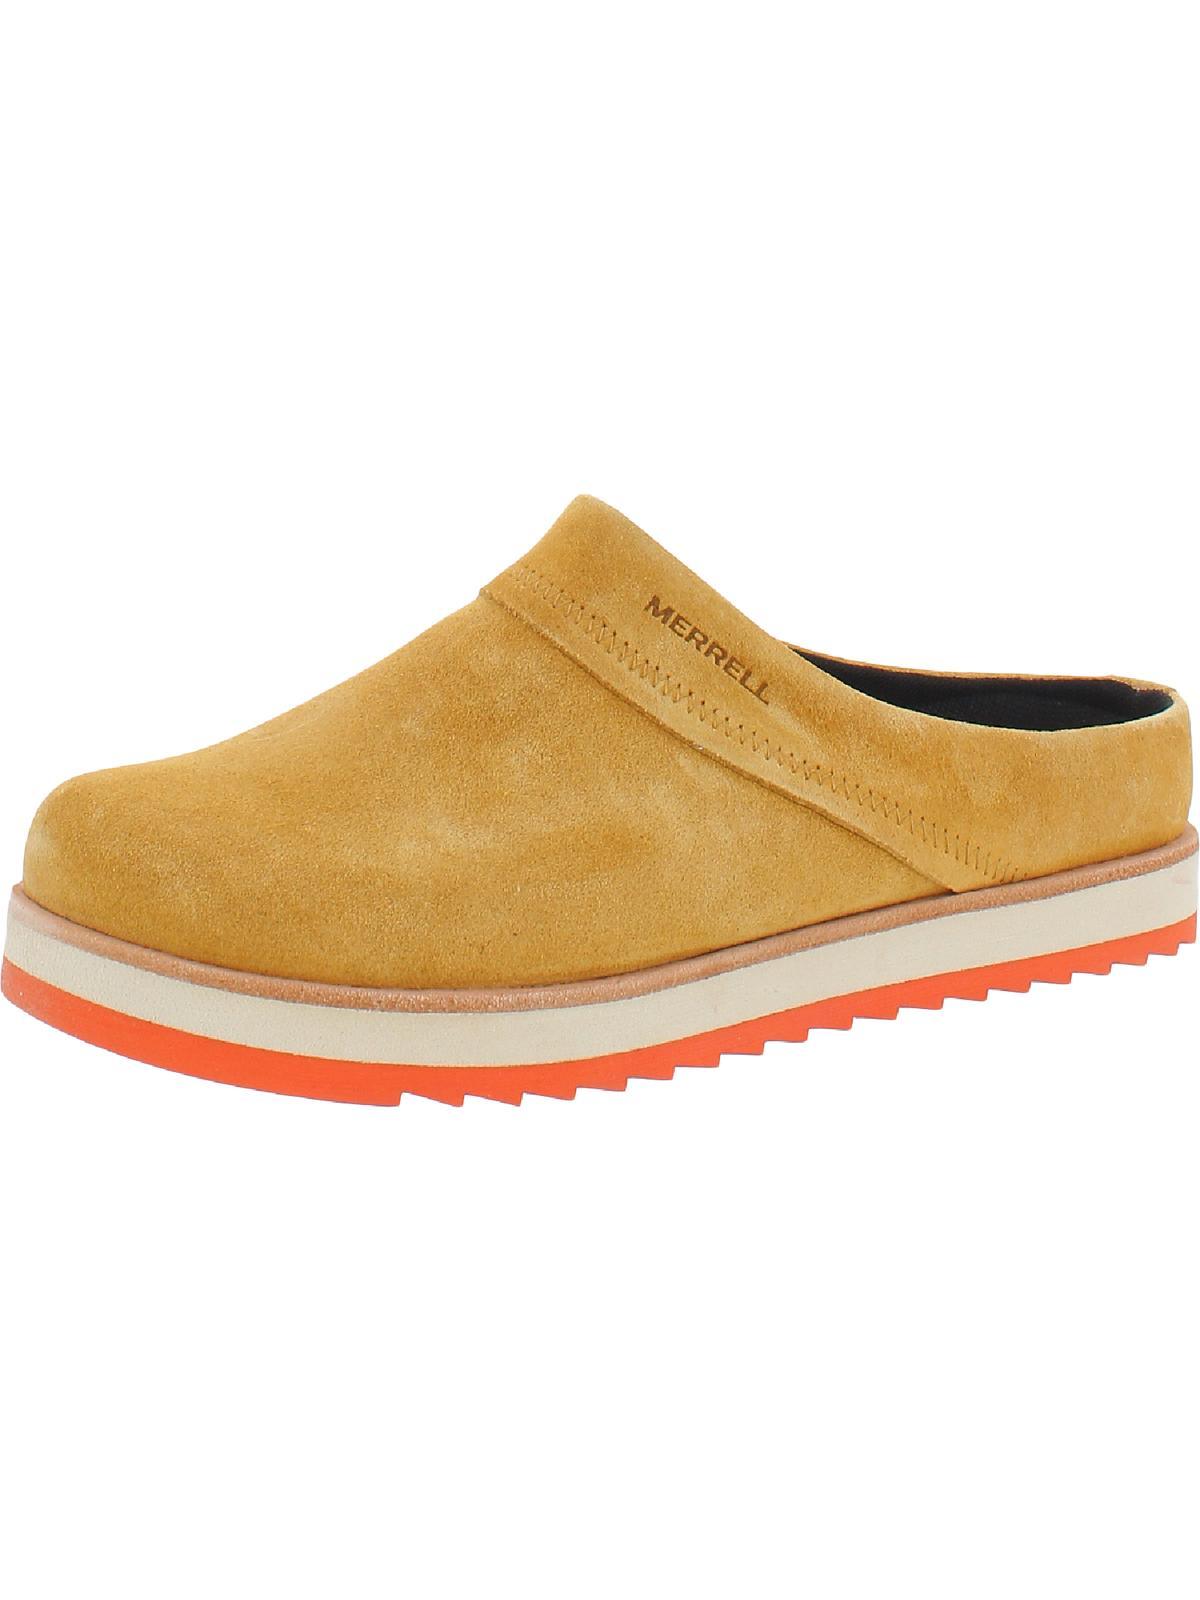 Merrell Juno Suede Slip On Clogs Natural | Lyst